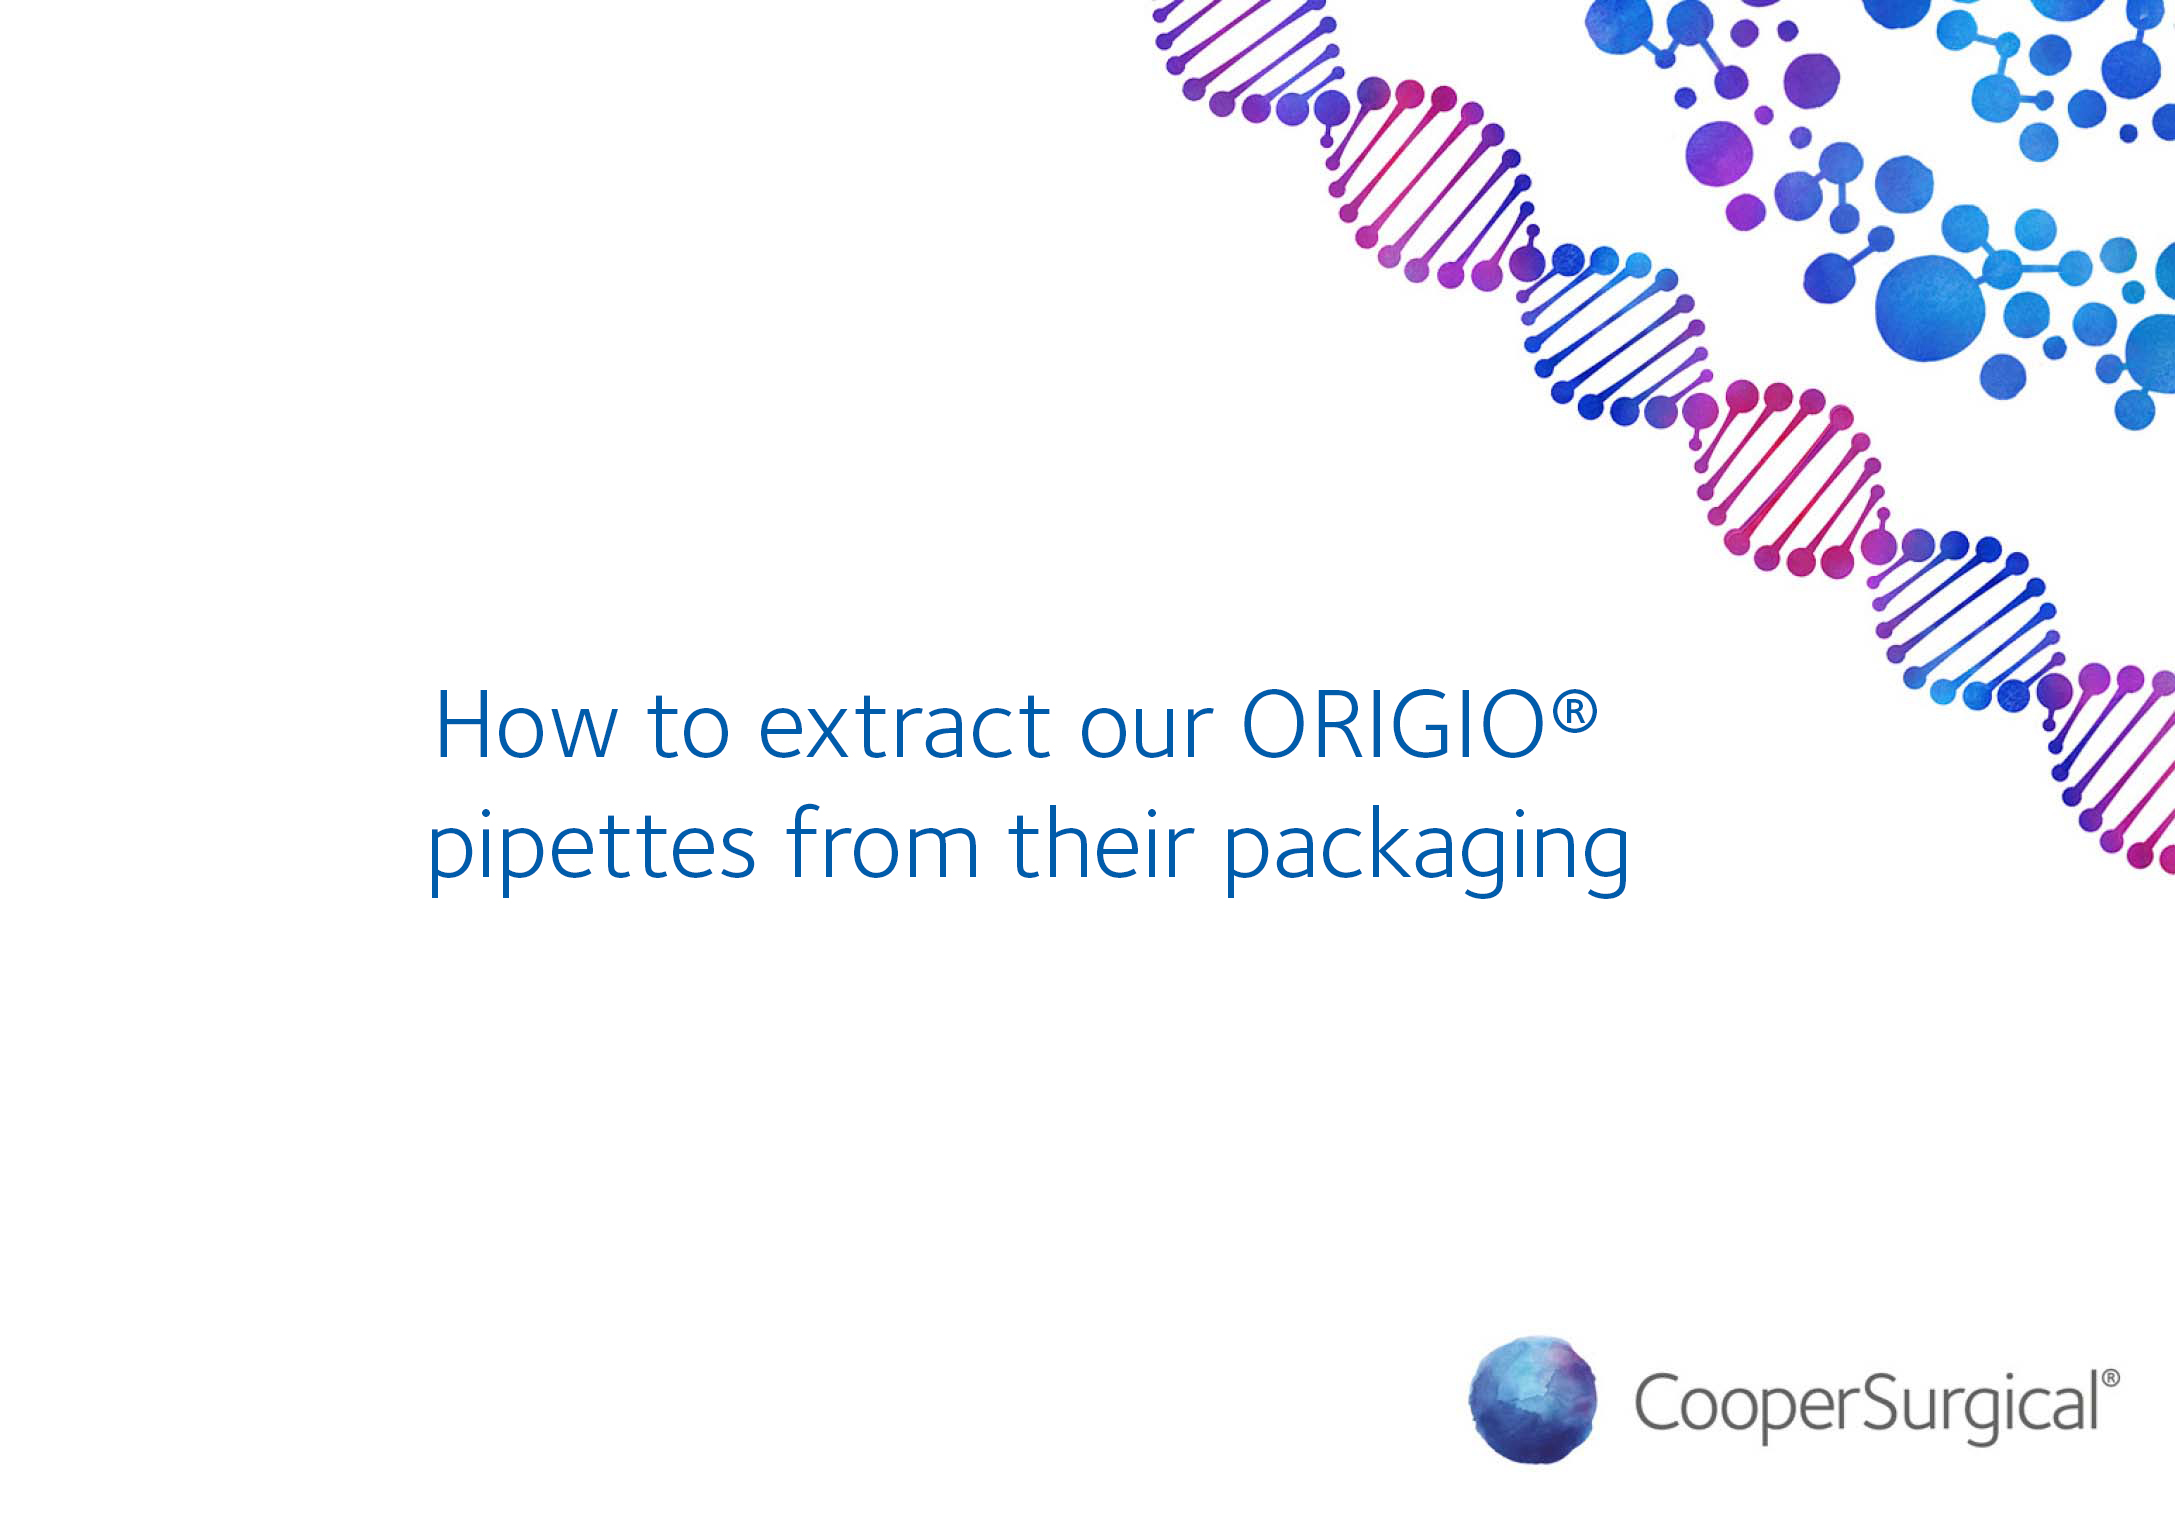 How-to-extract-our-ORIGIO-pipettes-from-their-packaging